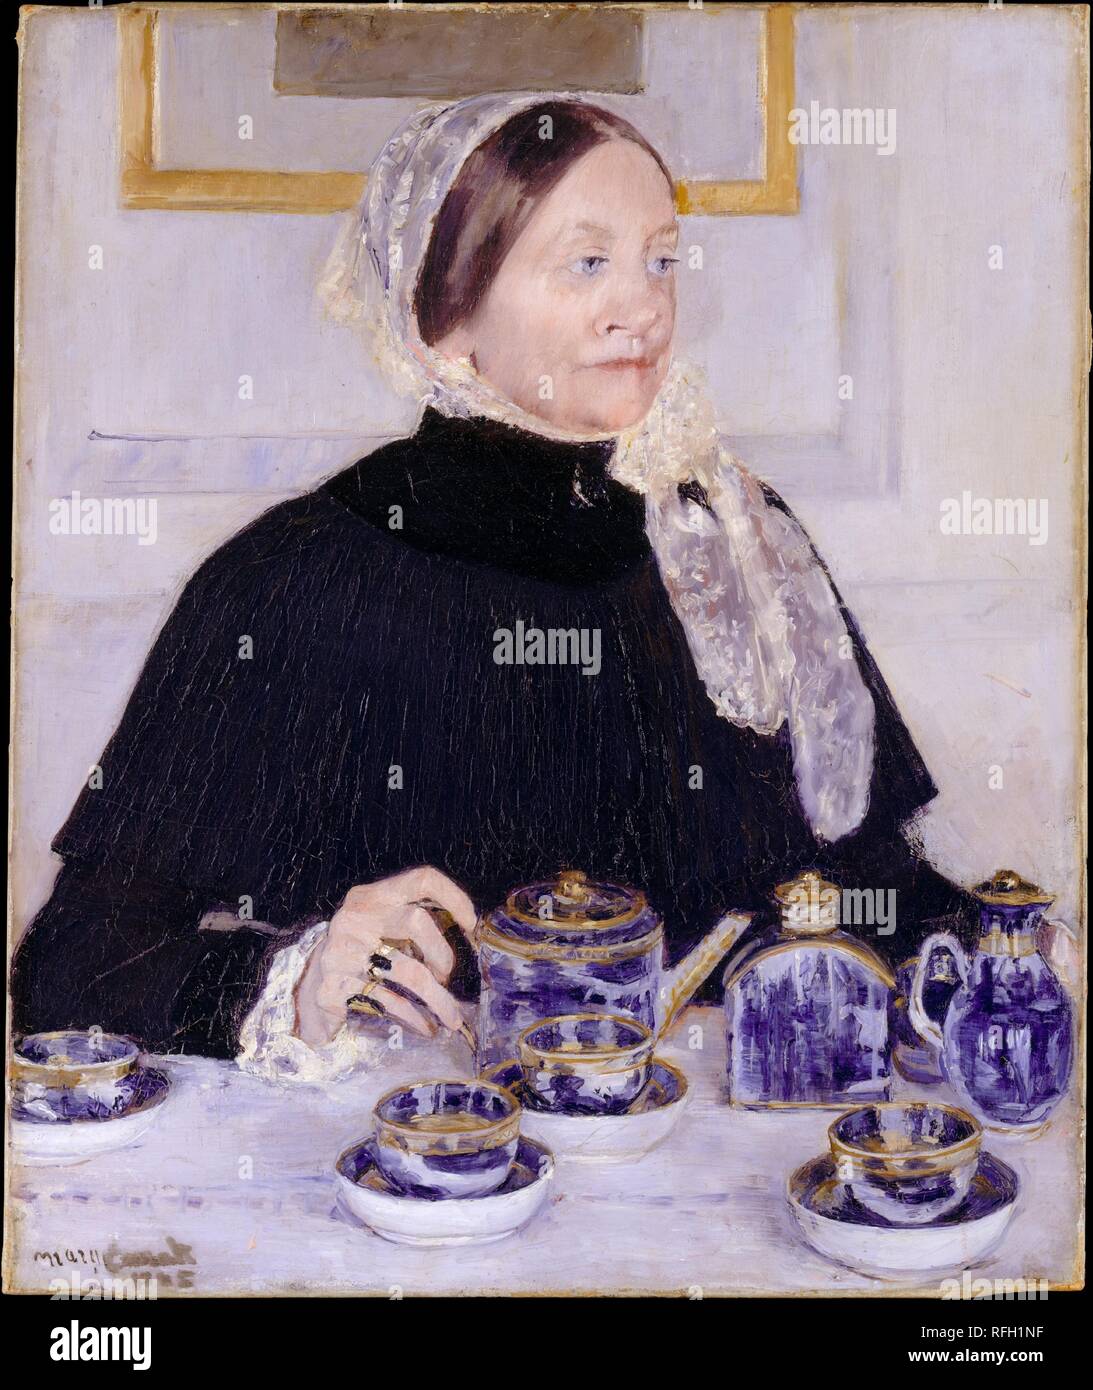 Lady at the Tea Table. Artist: Mary Cassatt (American, Pittsburgh, Pennsylvania 1844-1926 Le Mesnil-Théribus, Oise). Dimensions: 29 x 24 in. (73.7 x 61 cm). Date: 1883-85.  This work shows Mary Dickinson Riddle, Cassatt's mother's first cousin, presiding at tea, a daily ritual among upper-middle-class women on both sides of the Atlantic. Mrs. Riddle's hand rests on the handle of a teapot, part of a gilded blue-and-white Canton porcelain service that her daughter had presented to the artist's family. Painted in response to the gift, the portrait demonstrates Cassatt's mastery of Impressionism i Stock Photo